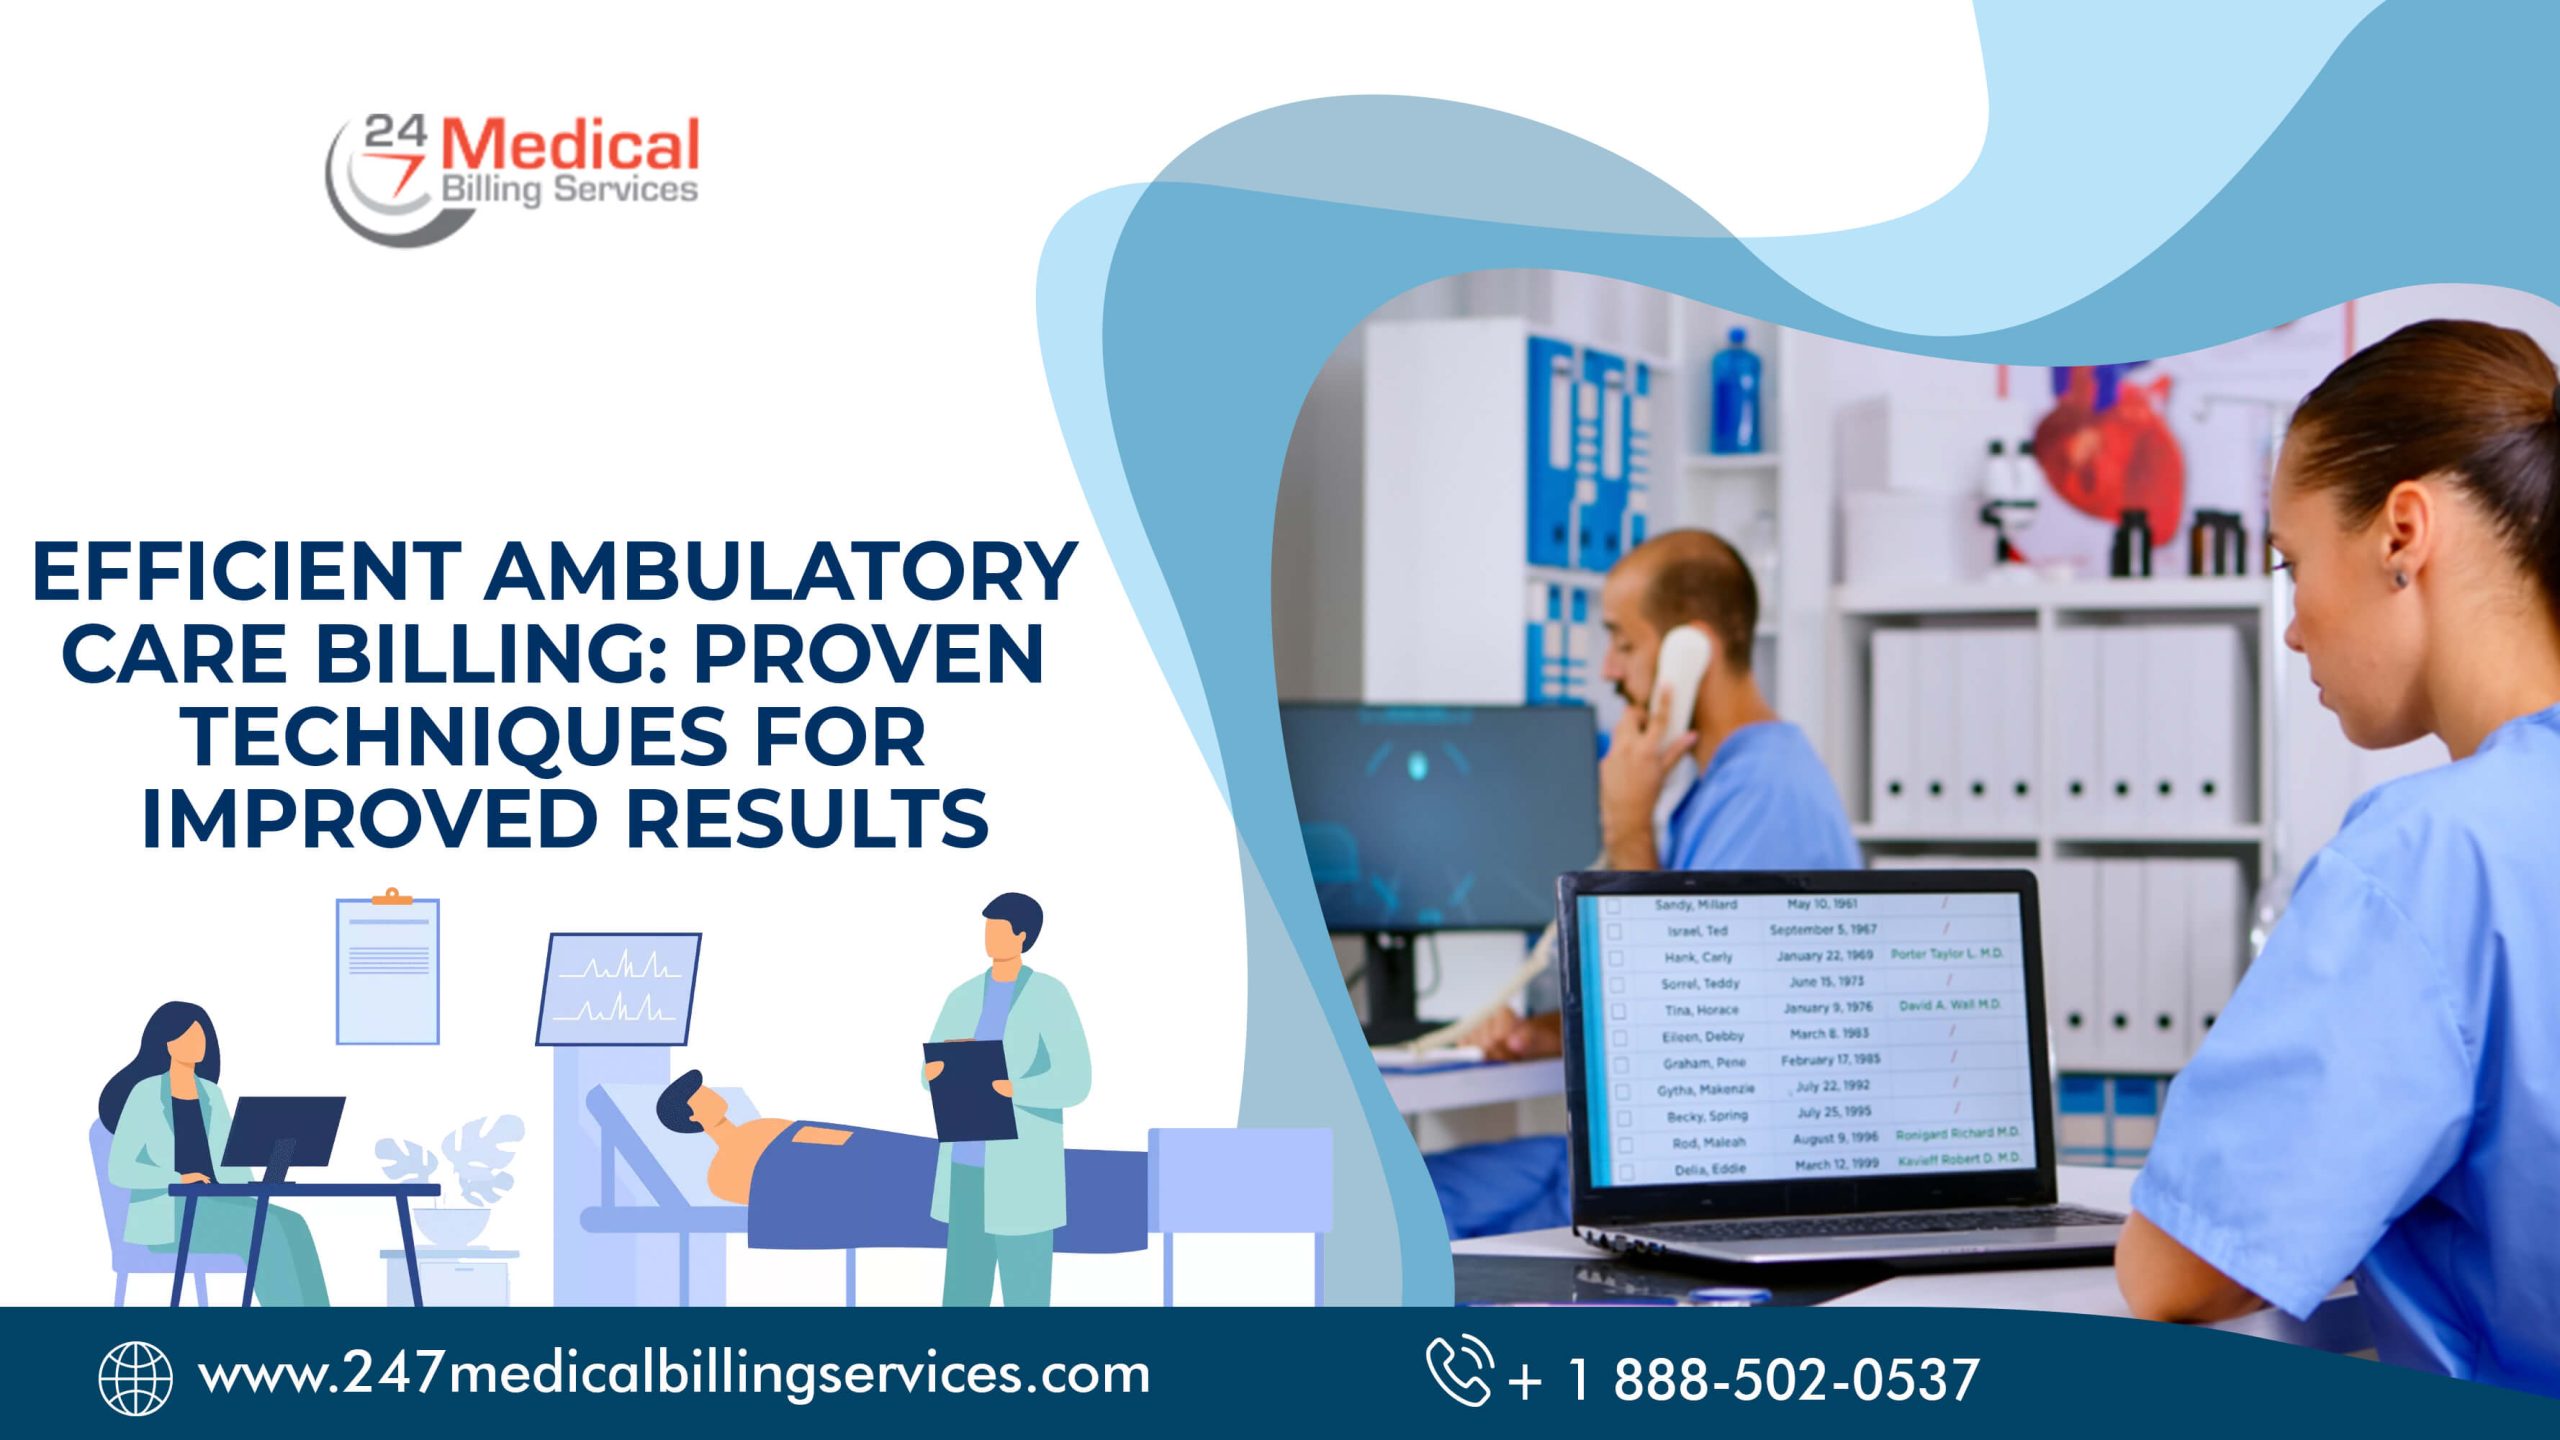  Efficient Ambulatory Care Billing: Proven Techniques for Improved Results